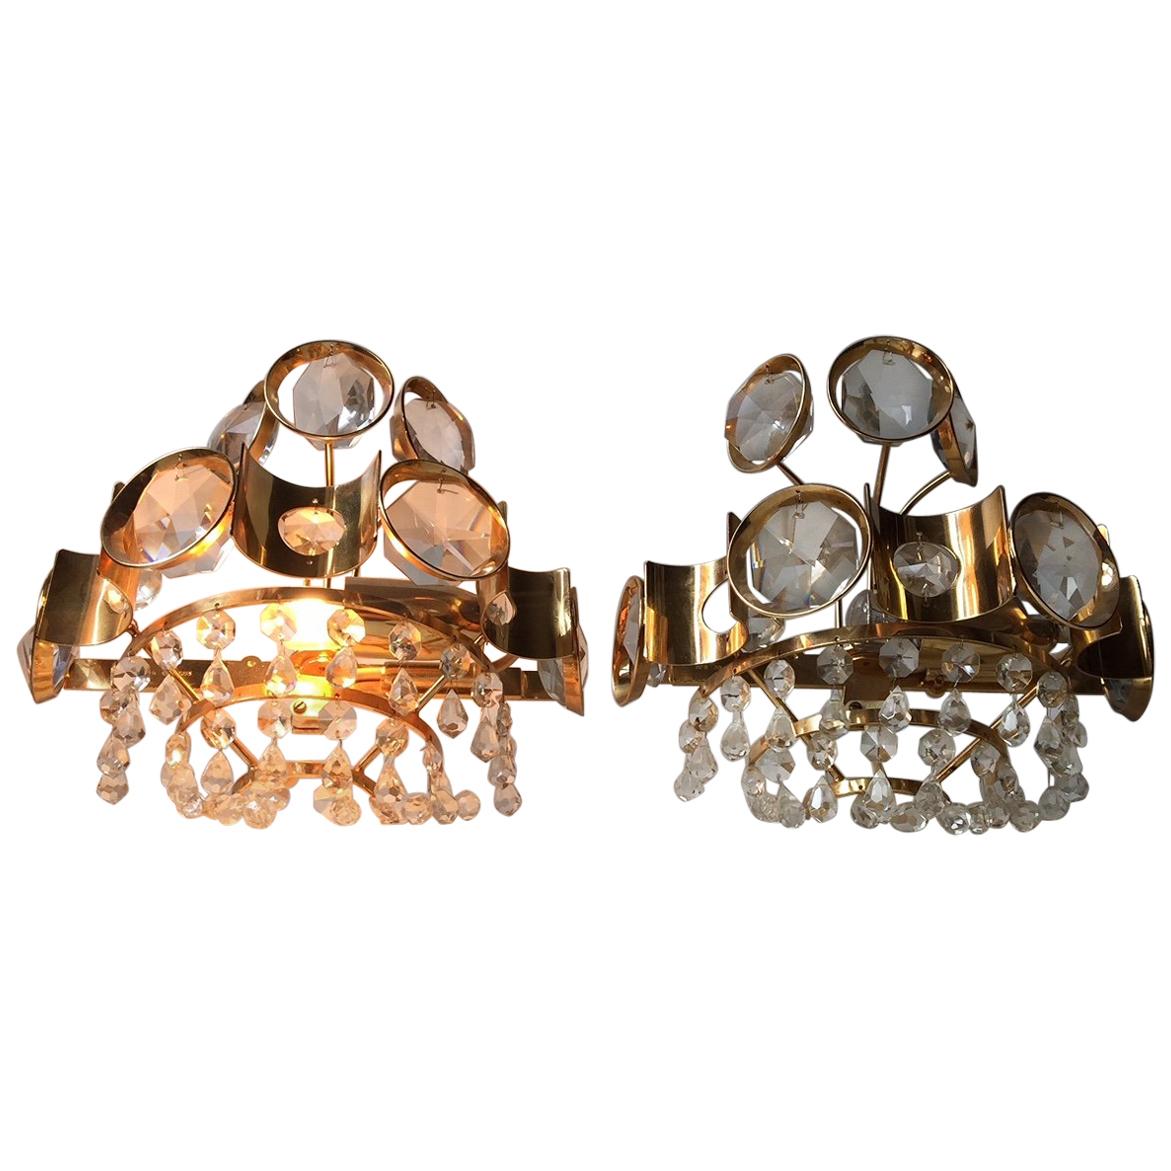 Pair of Vintage Danish Gilded Sconces with Crystal Prisms from M.P.R, 1970s